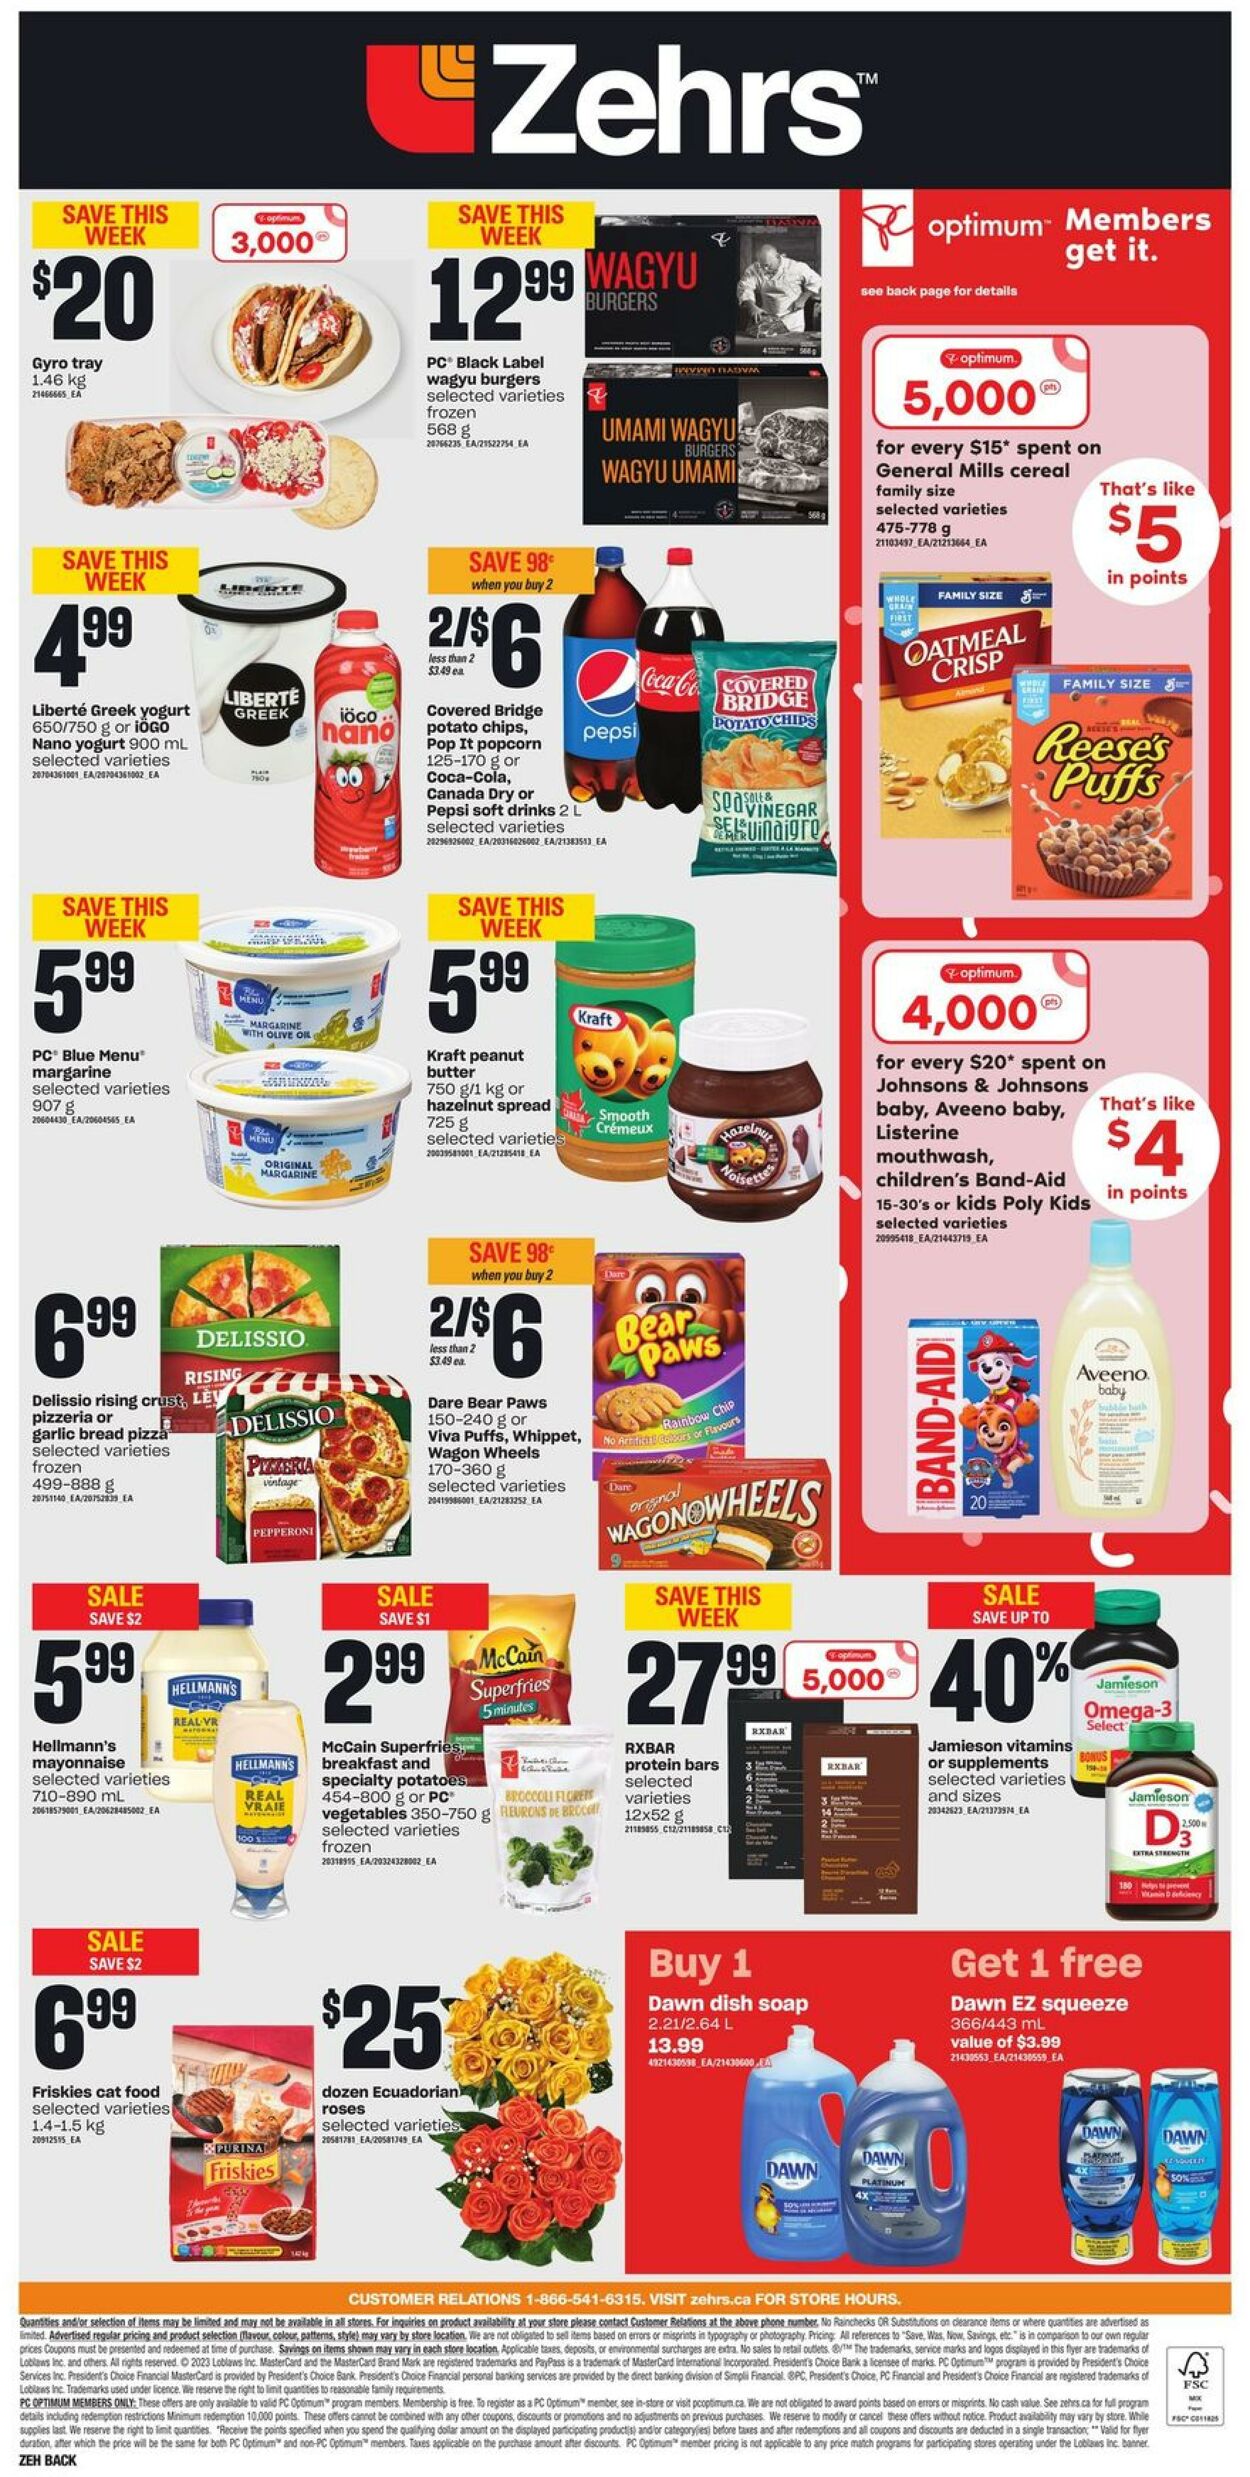 Zehrs Promotional Flyer - Valid from 25.05 to 31.05 - Page nb 6 ...